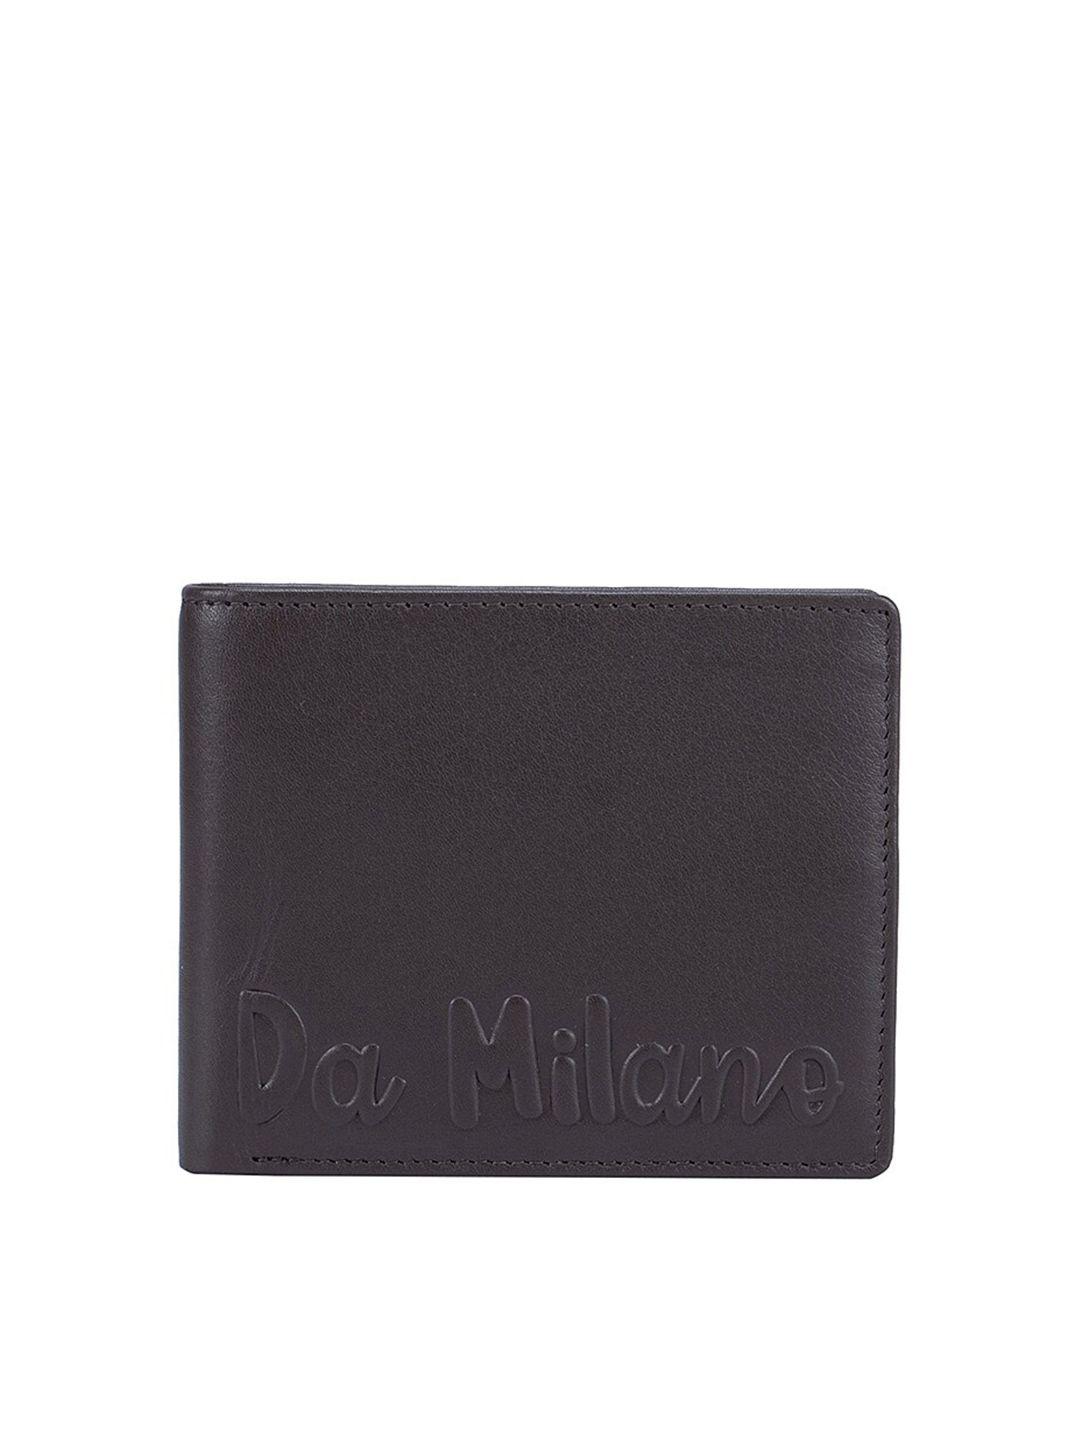 da milano men coffee brown textured leather two fold wallet